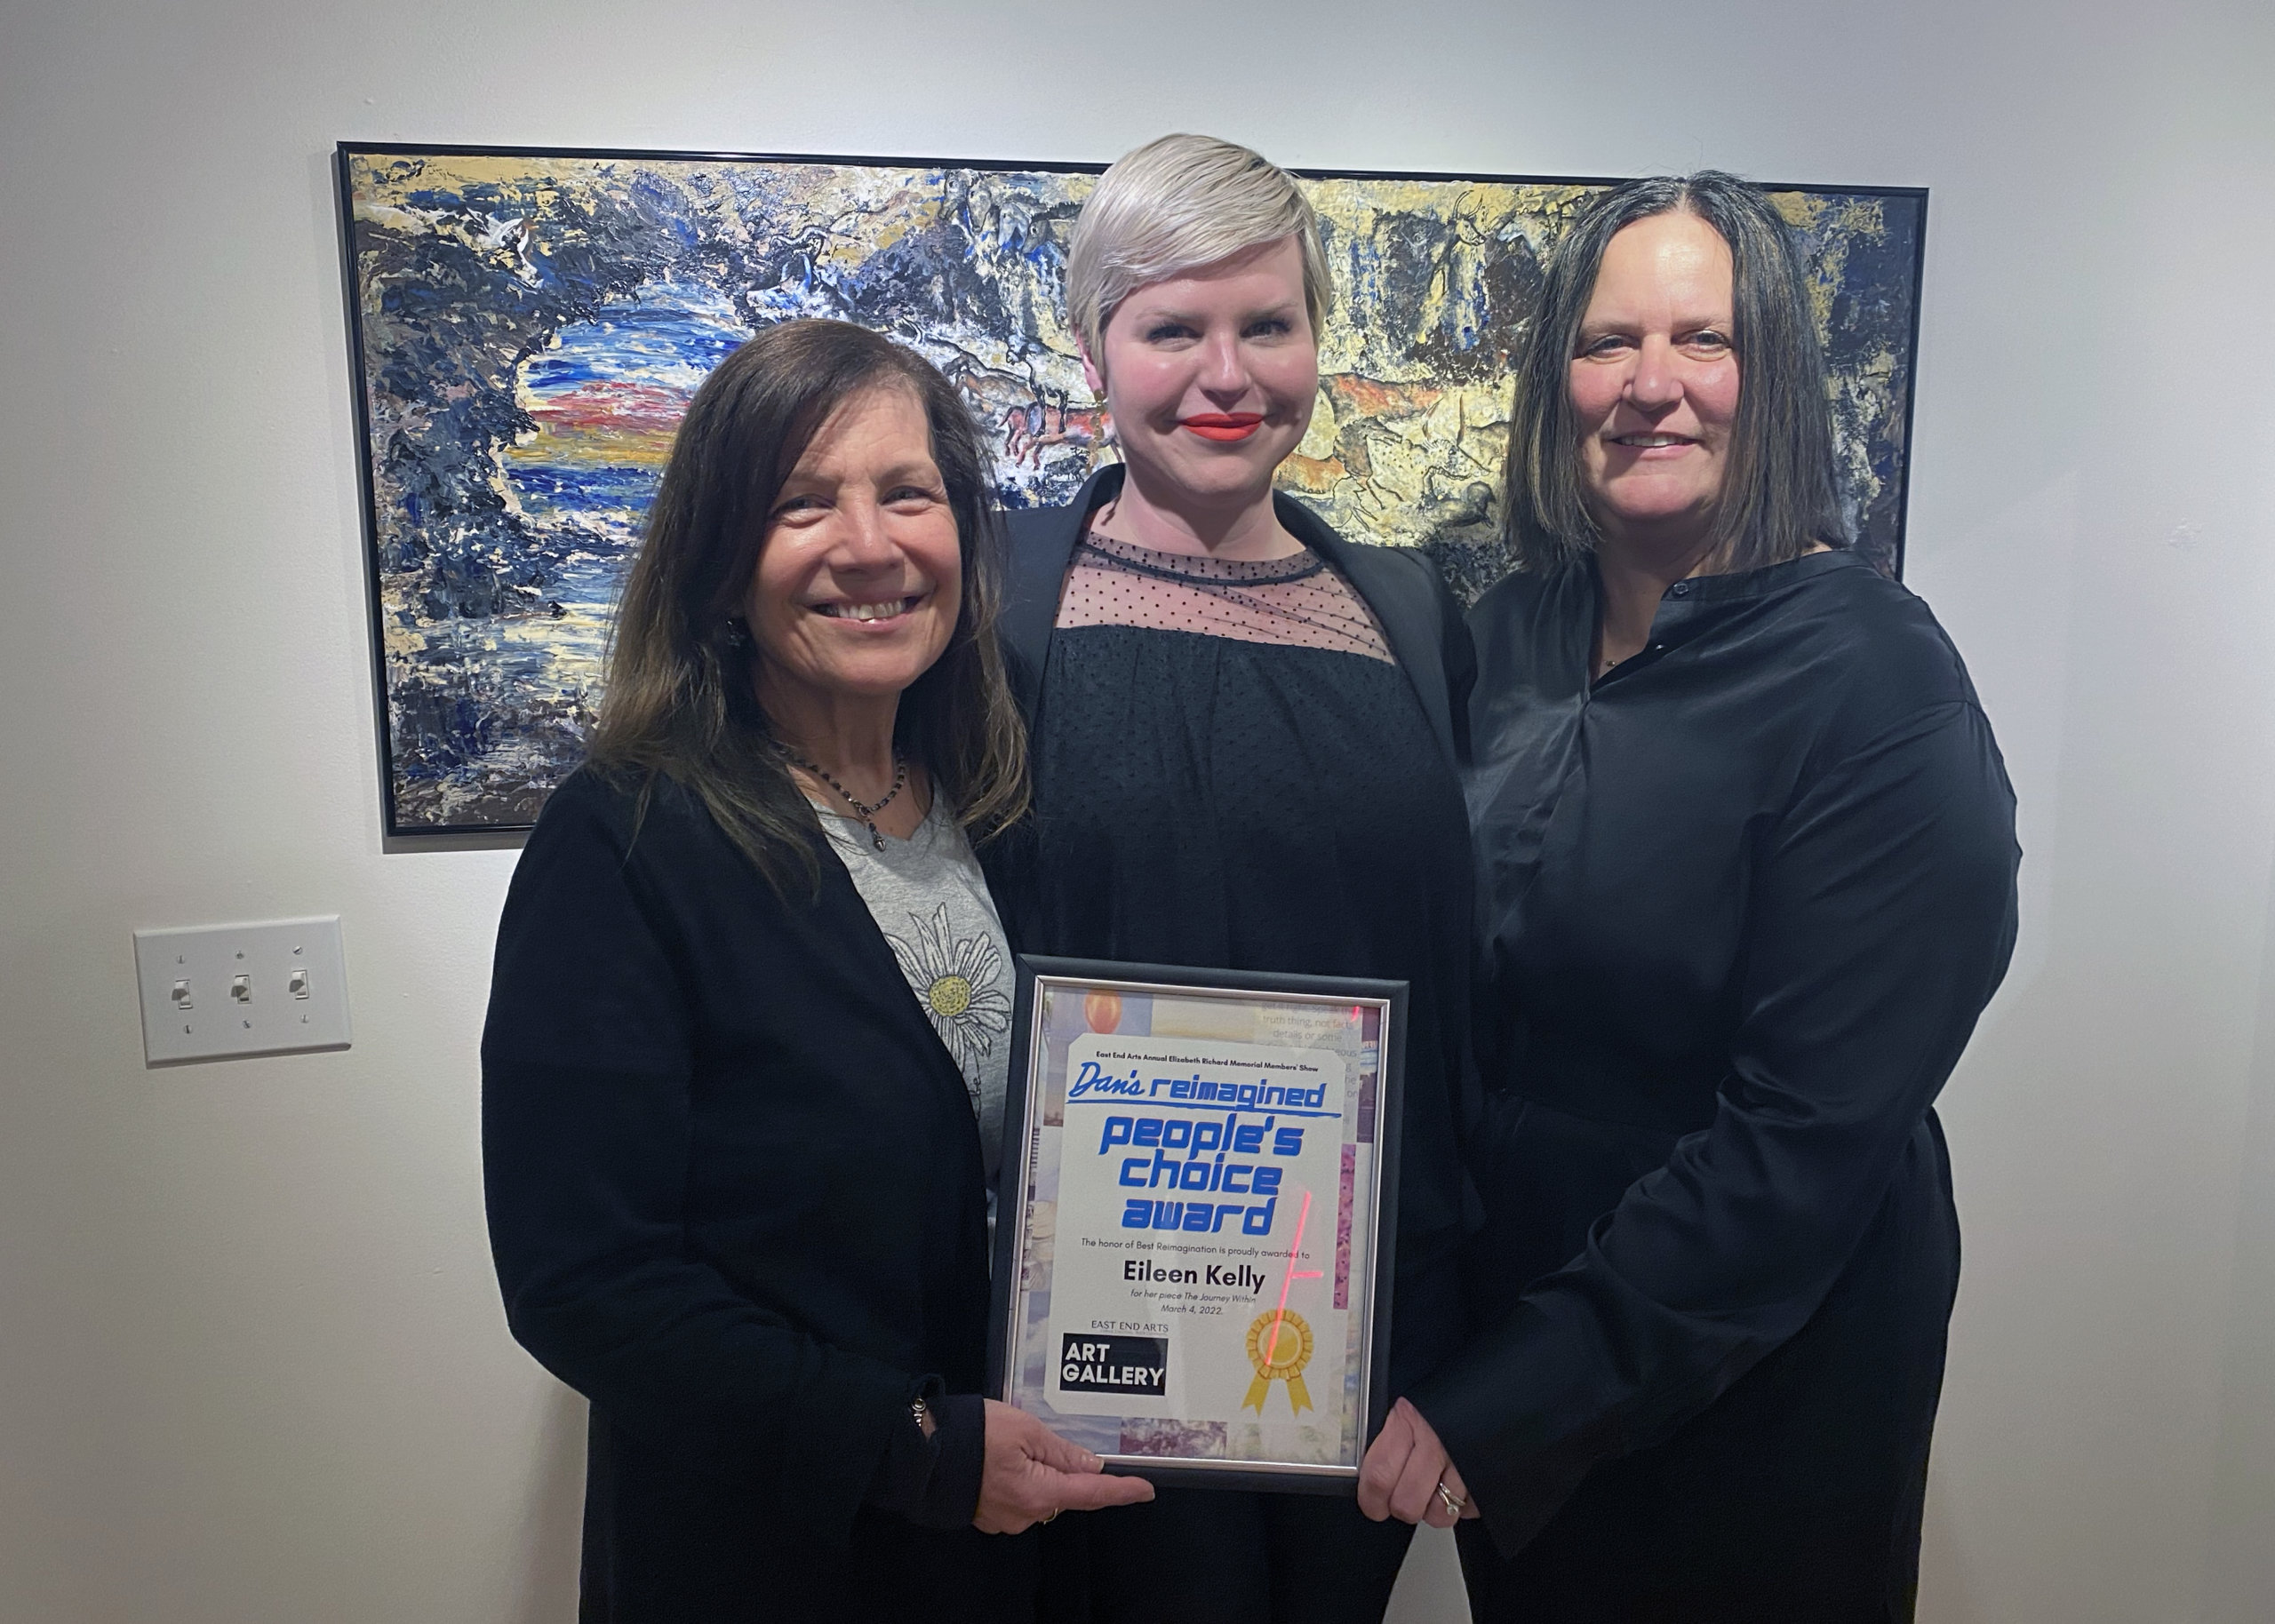 Eileen Kelly receives her "Dan's Reimagined" People's Choice awards from East End Arts Membership + Gallery Manager Wendy Weiss and EEA director Diane Burke